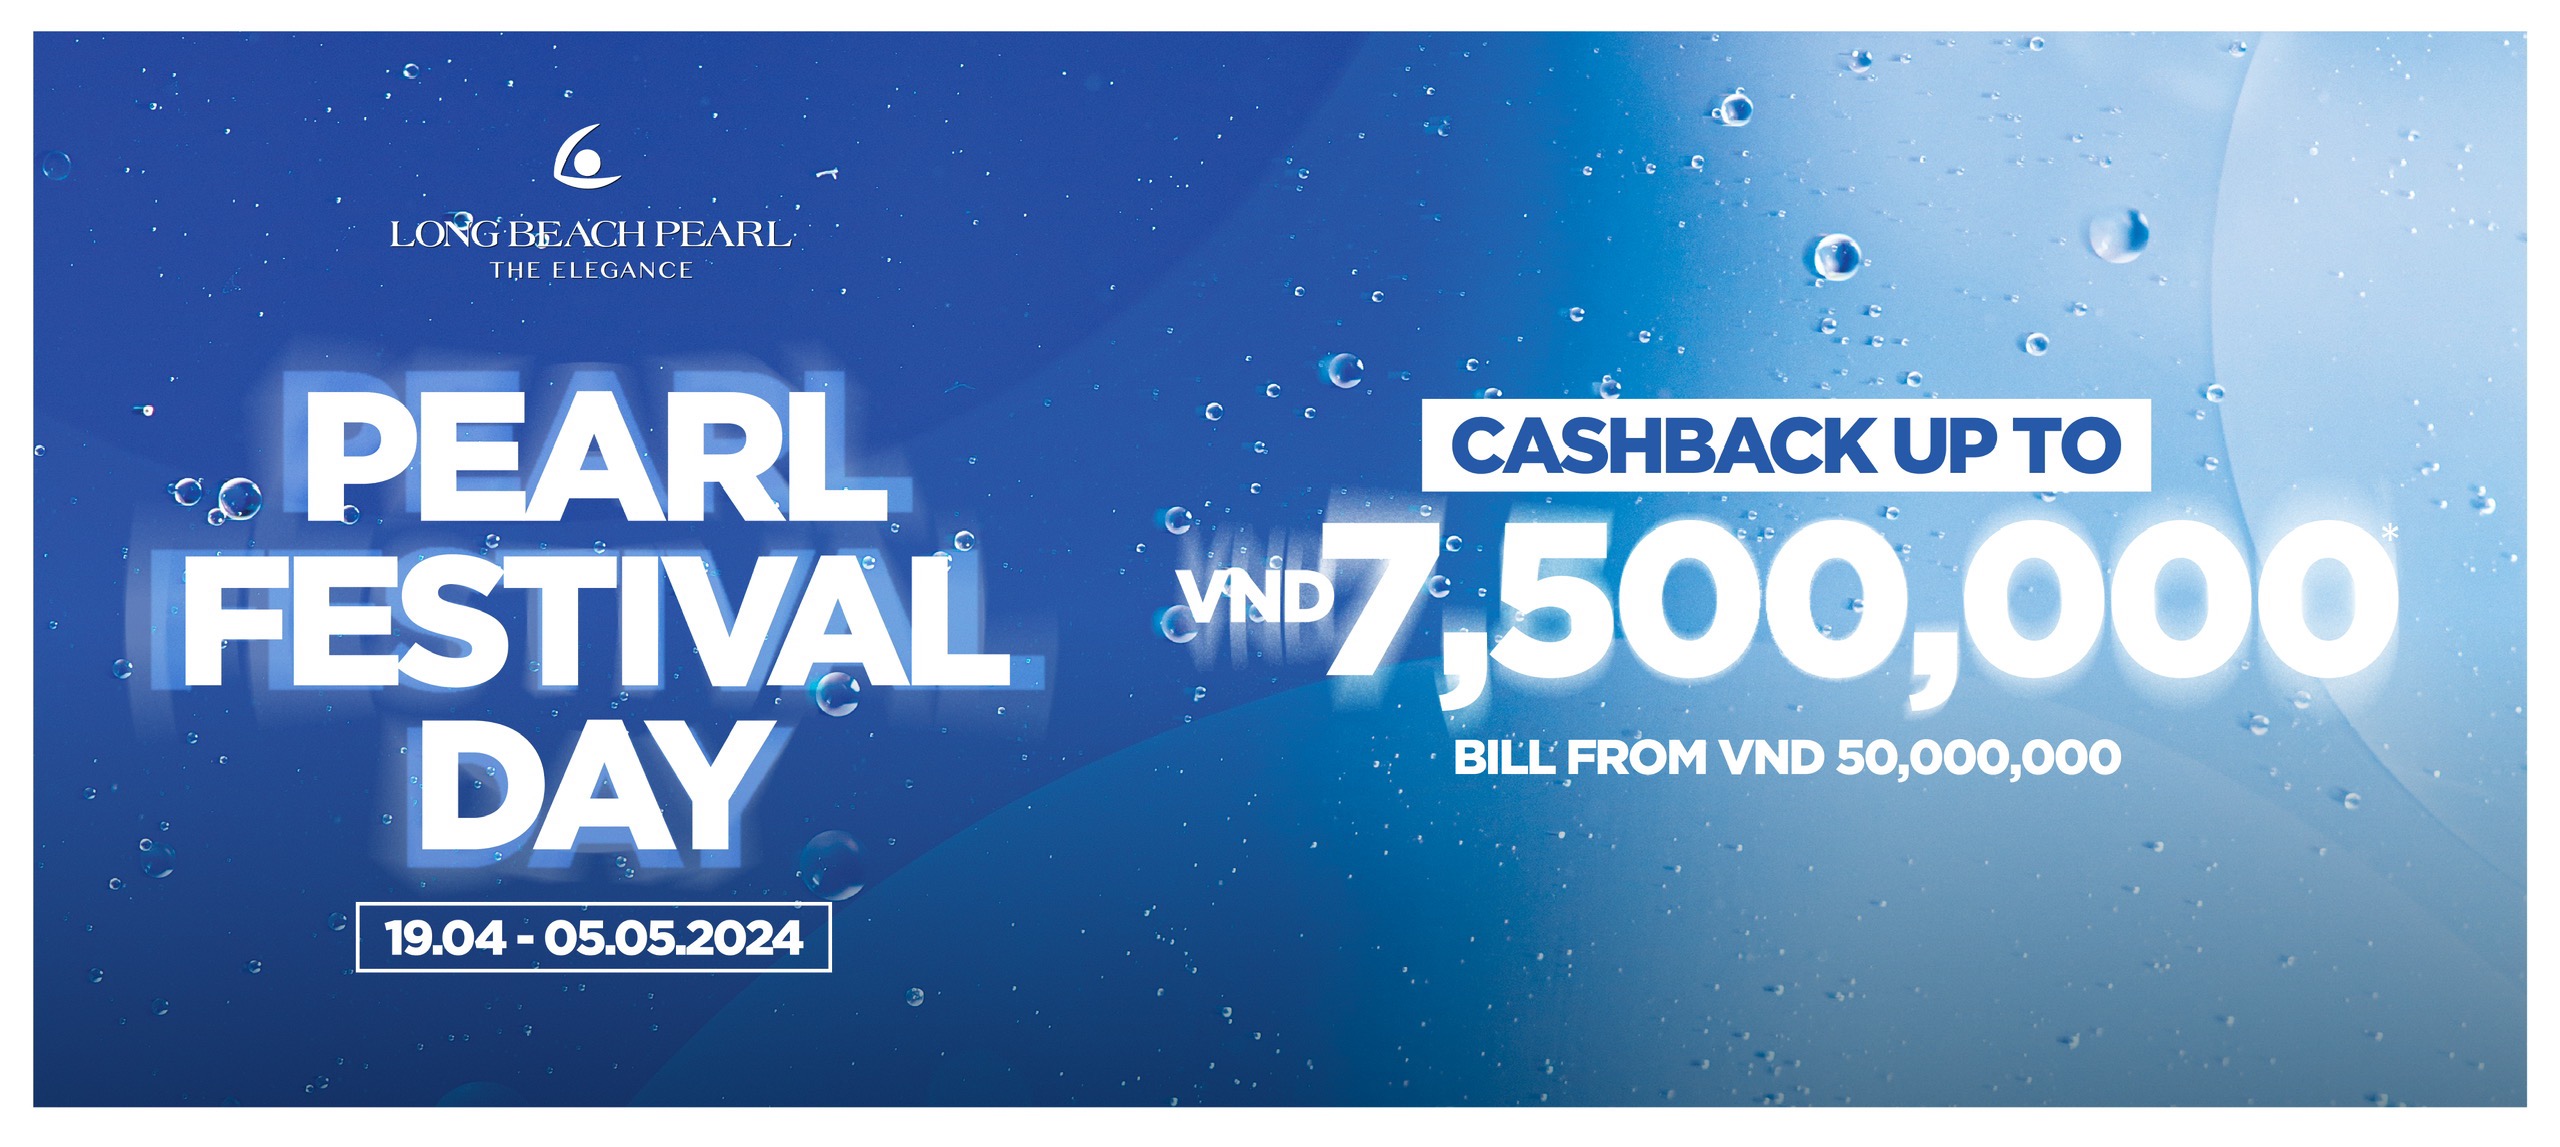 LONG BEACH PEARL - CASHBACK UP TO VND 7,500,000